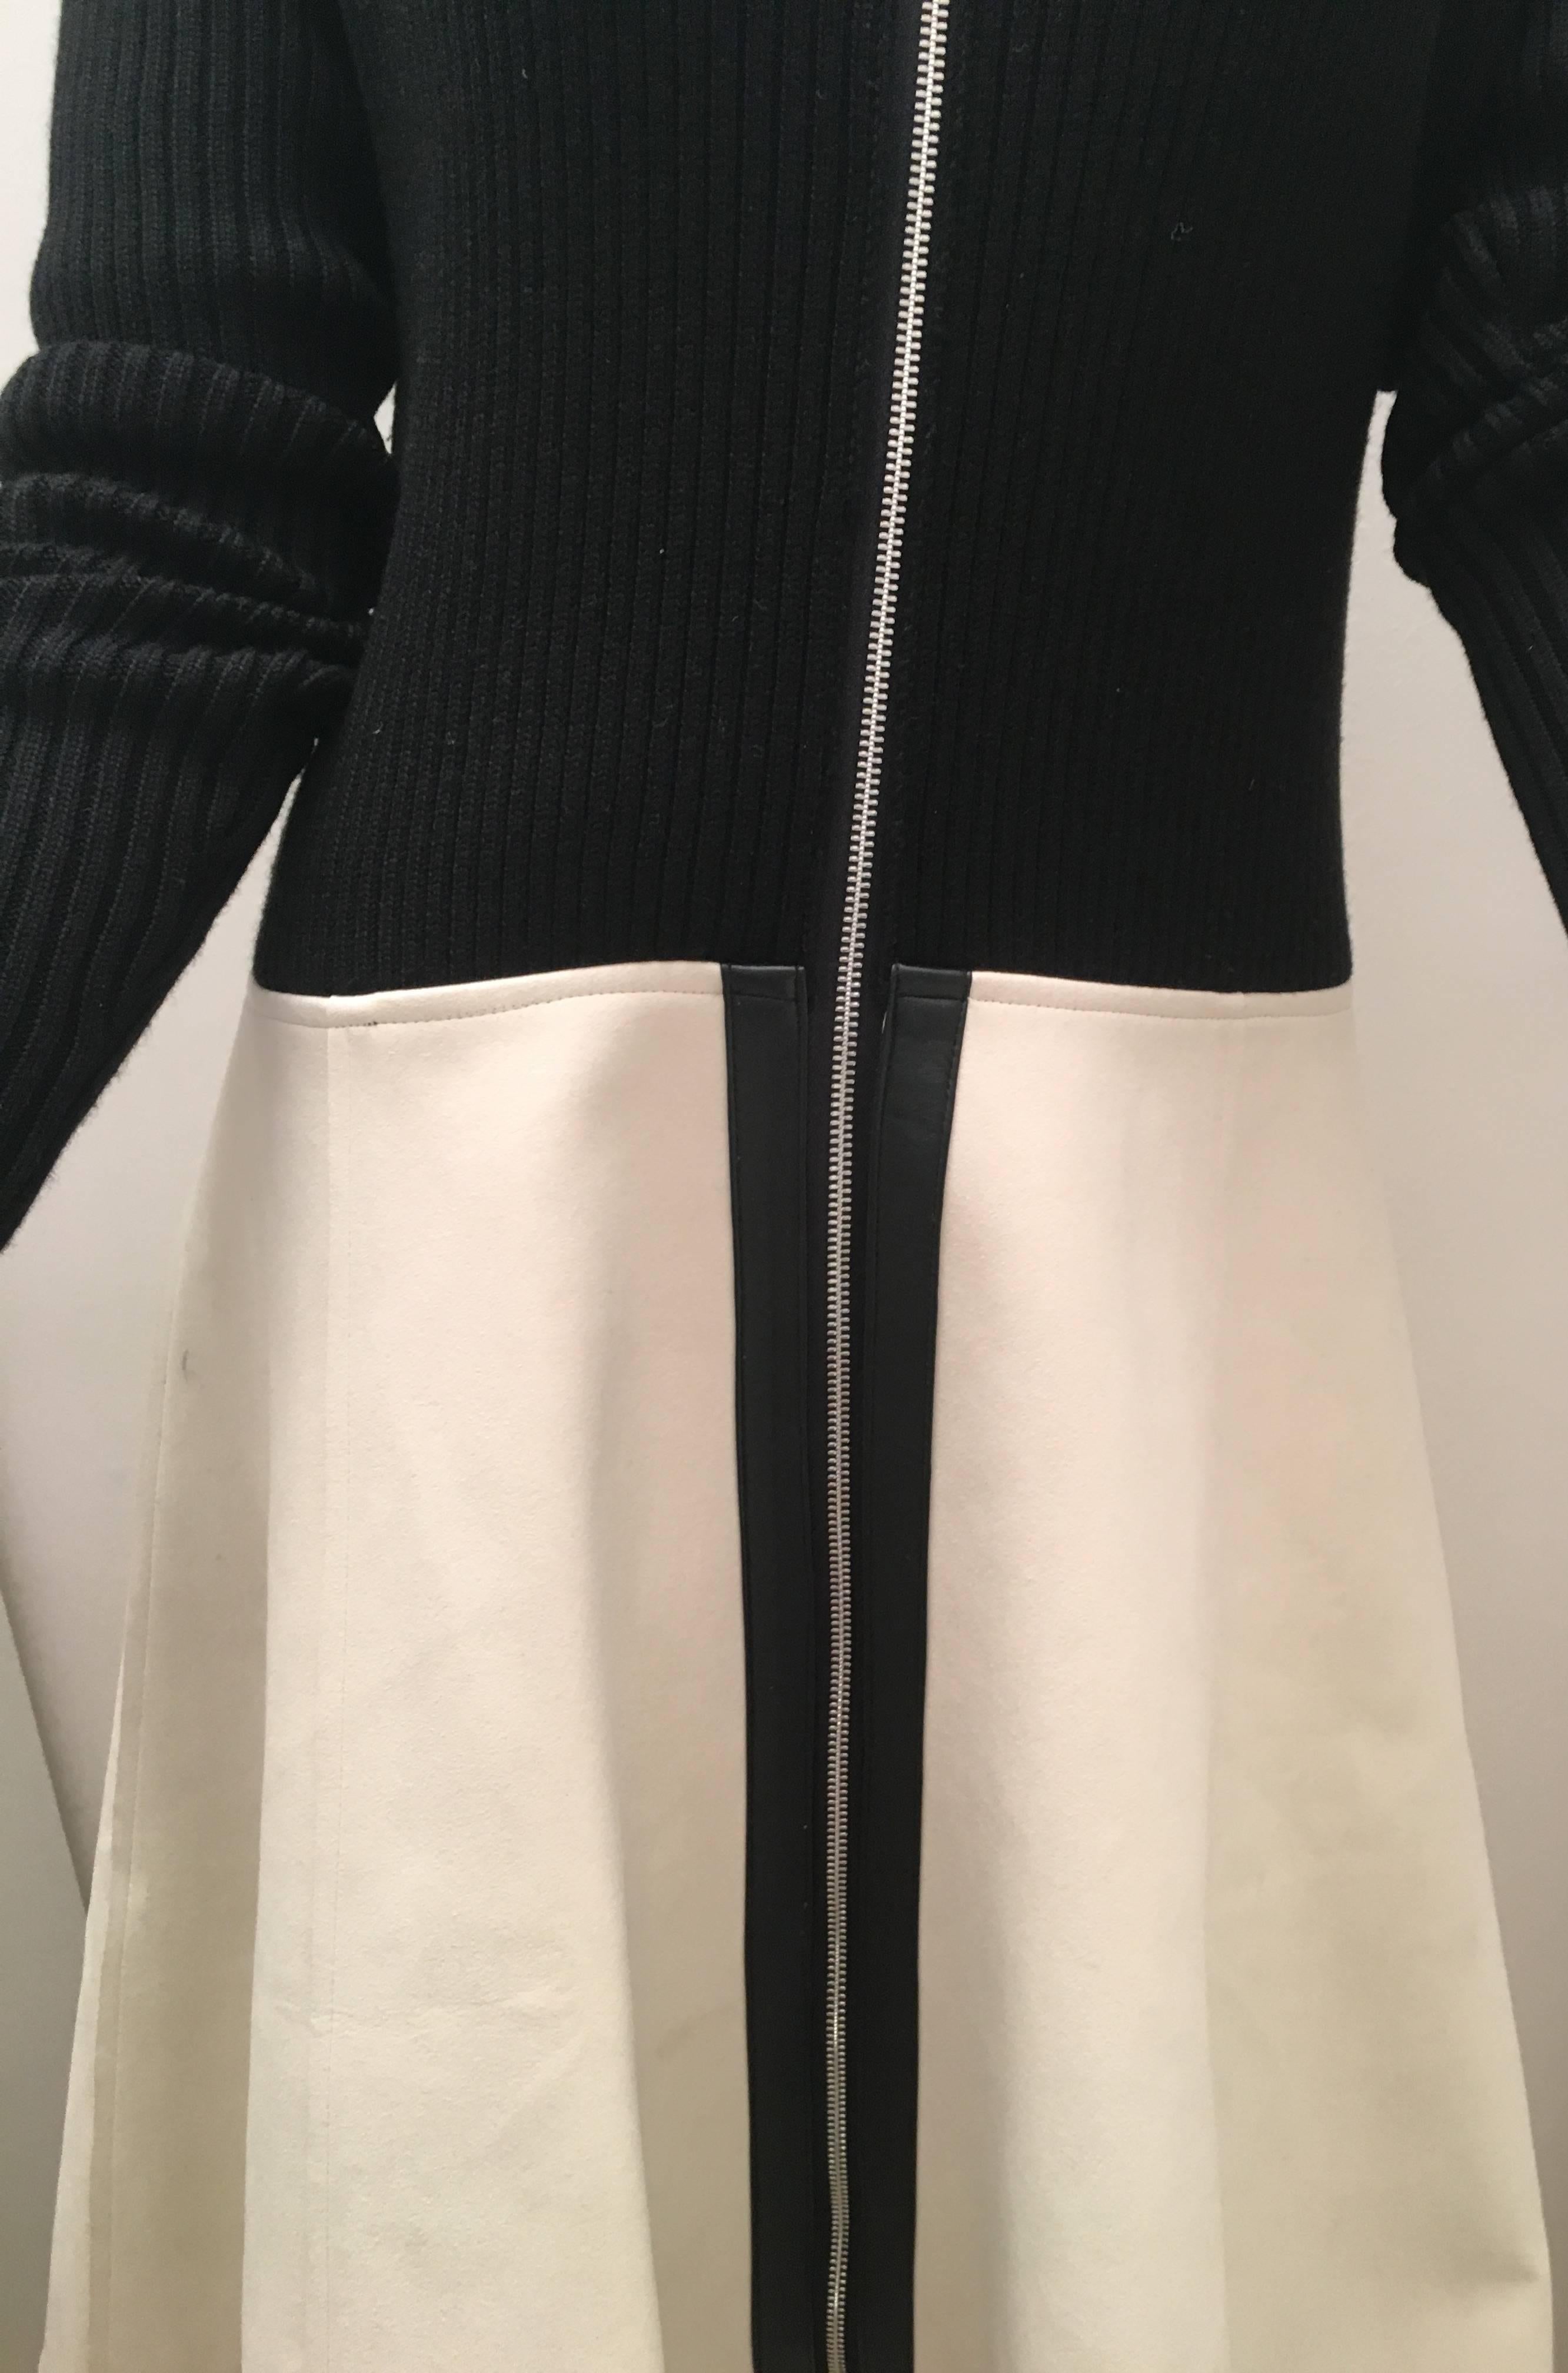 Brown Louis Vuitton Dress Black and White Runway For Sale